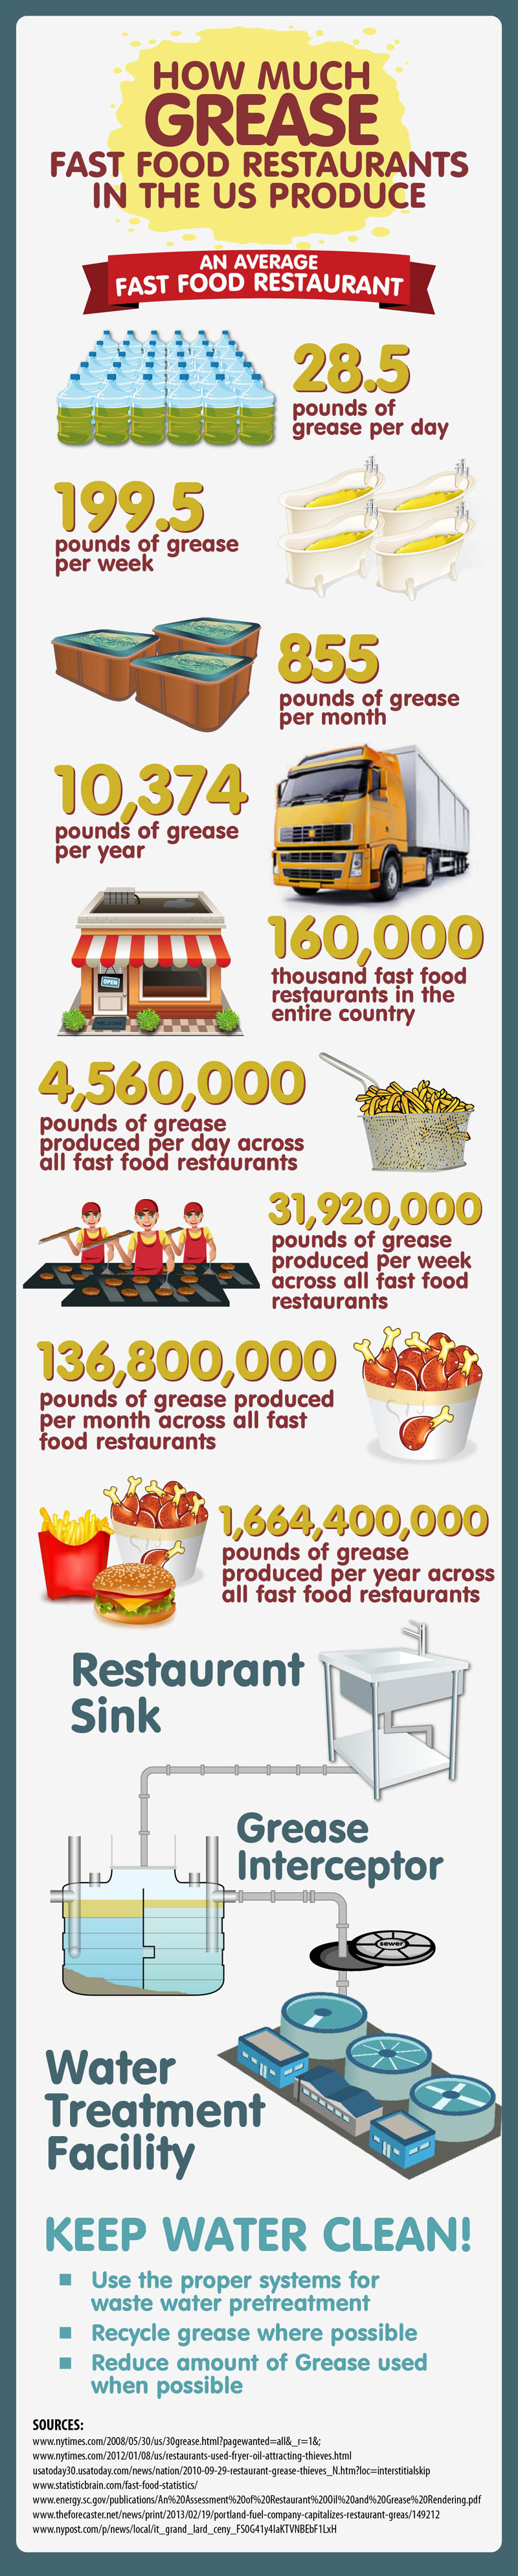 How Much Grease Do Fast Food Restaurants in the U.S. Produce?